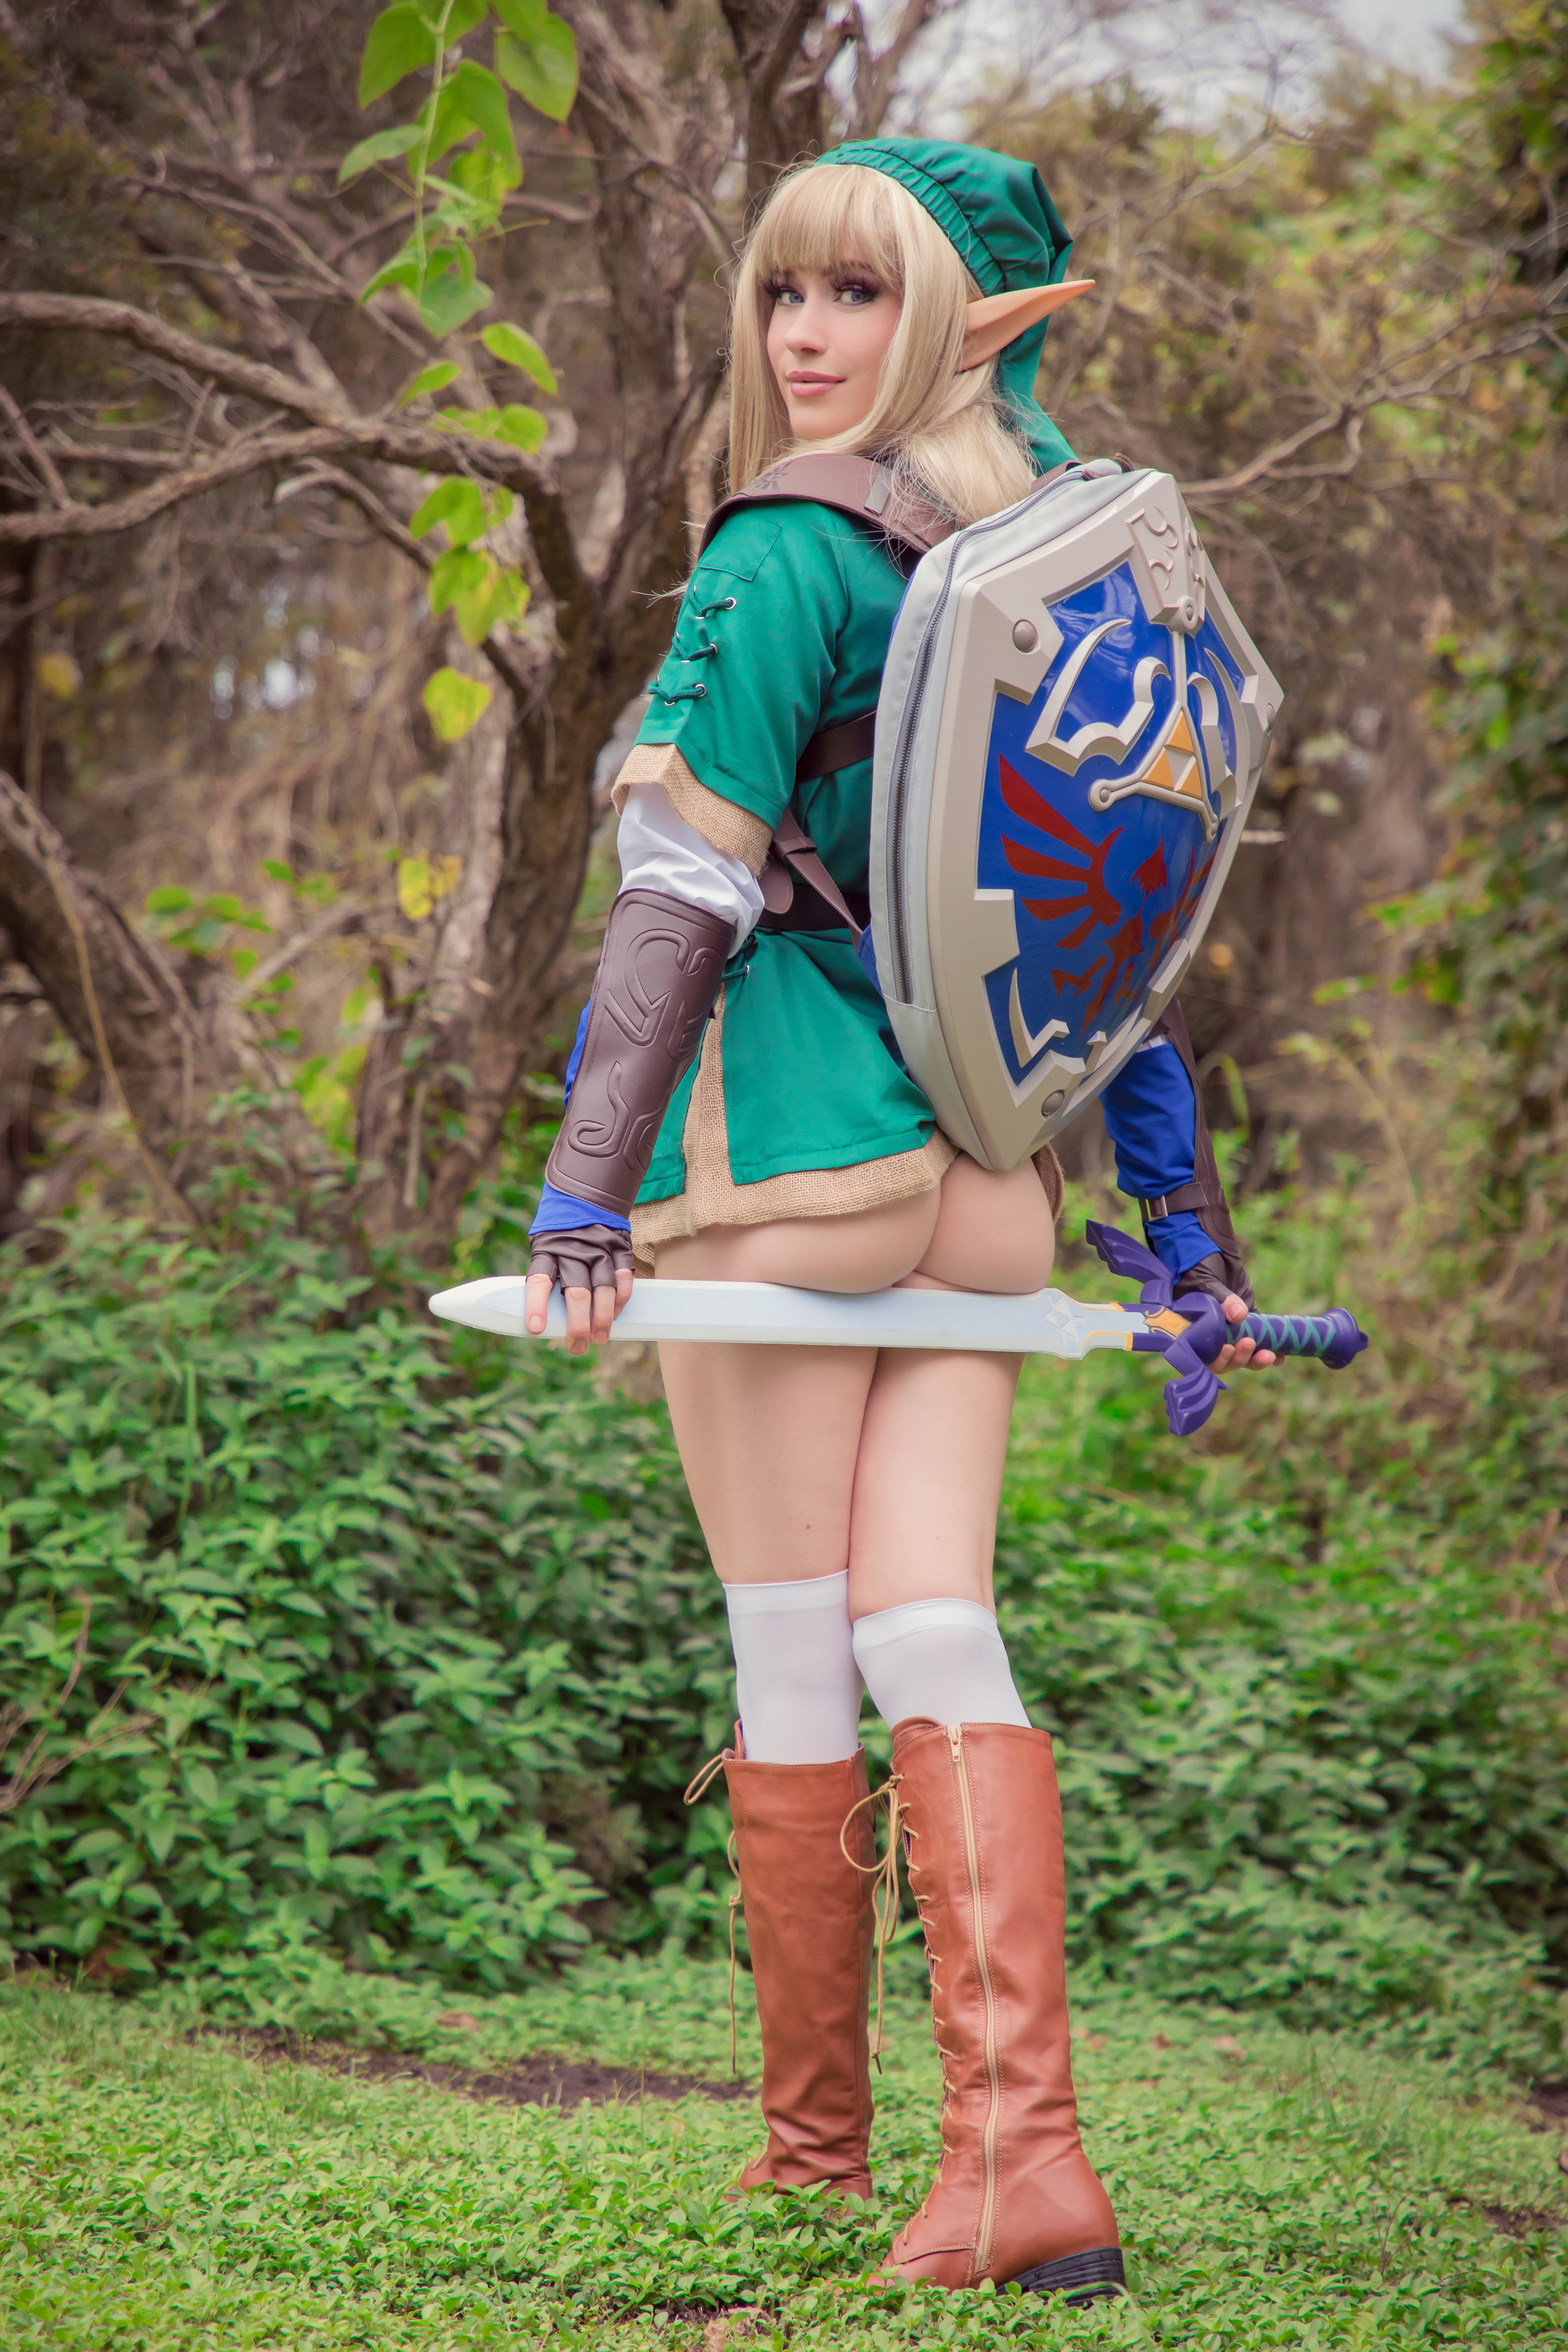 People 4480x6720 Nichameleon women model cosplay Link The Legend of Zelda video games sword video game characters dress blonde pointy ears elves looking at viewer blue eyes ass knee-highs boots behind forest portrait display outdoors women outdoors genderswap butt floss white stockings green tunic